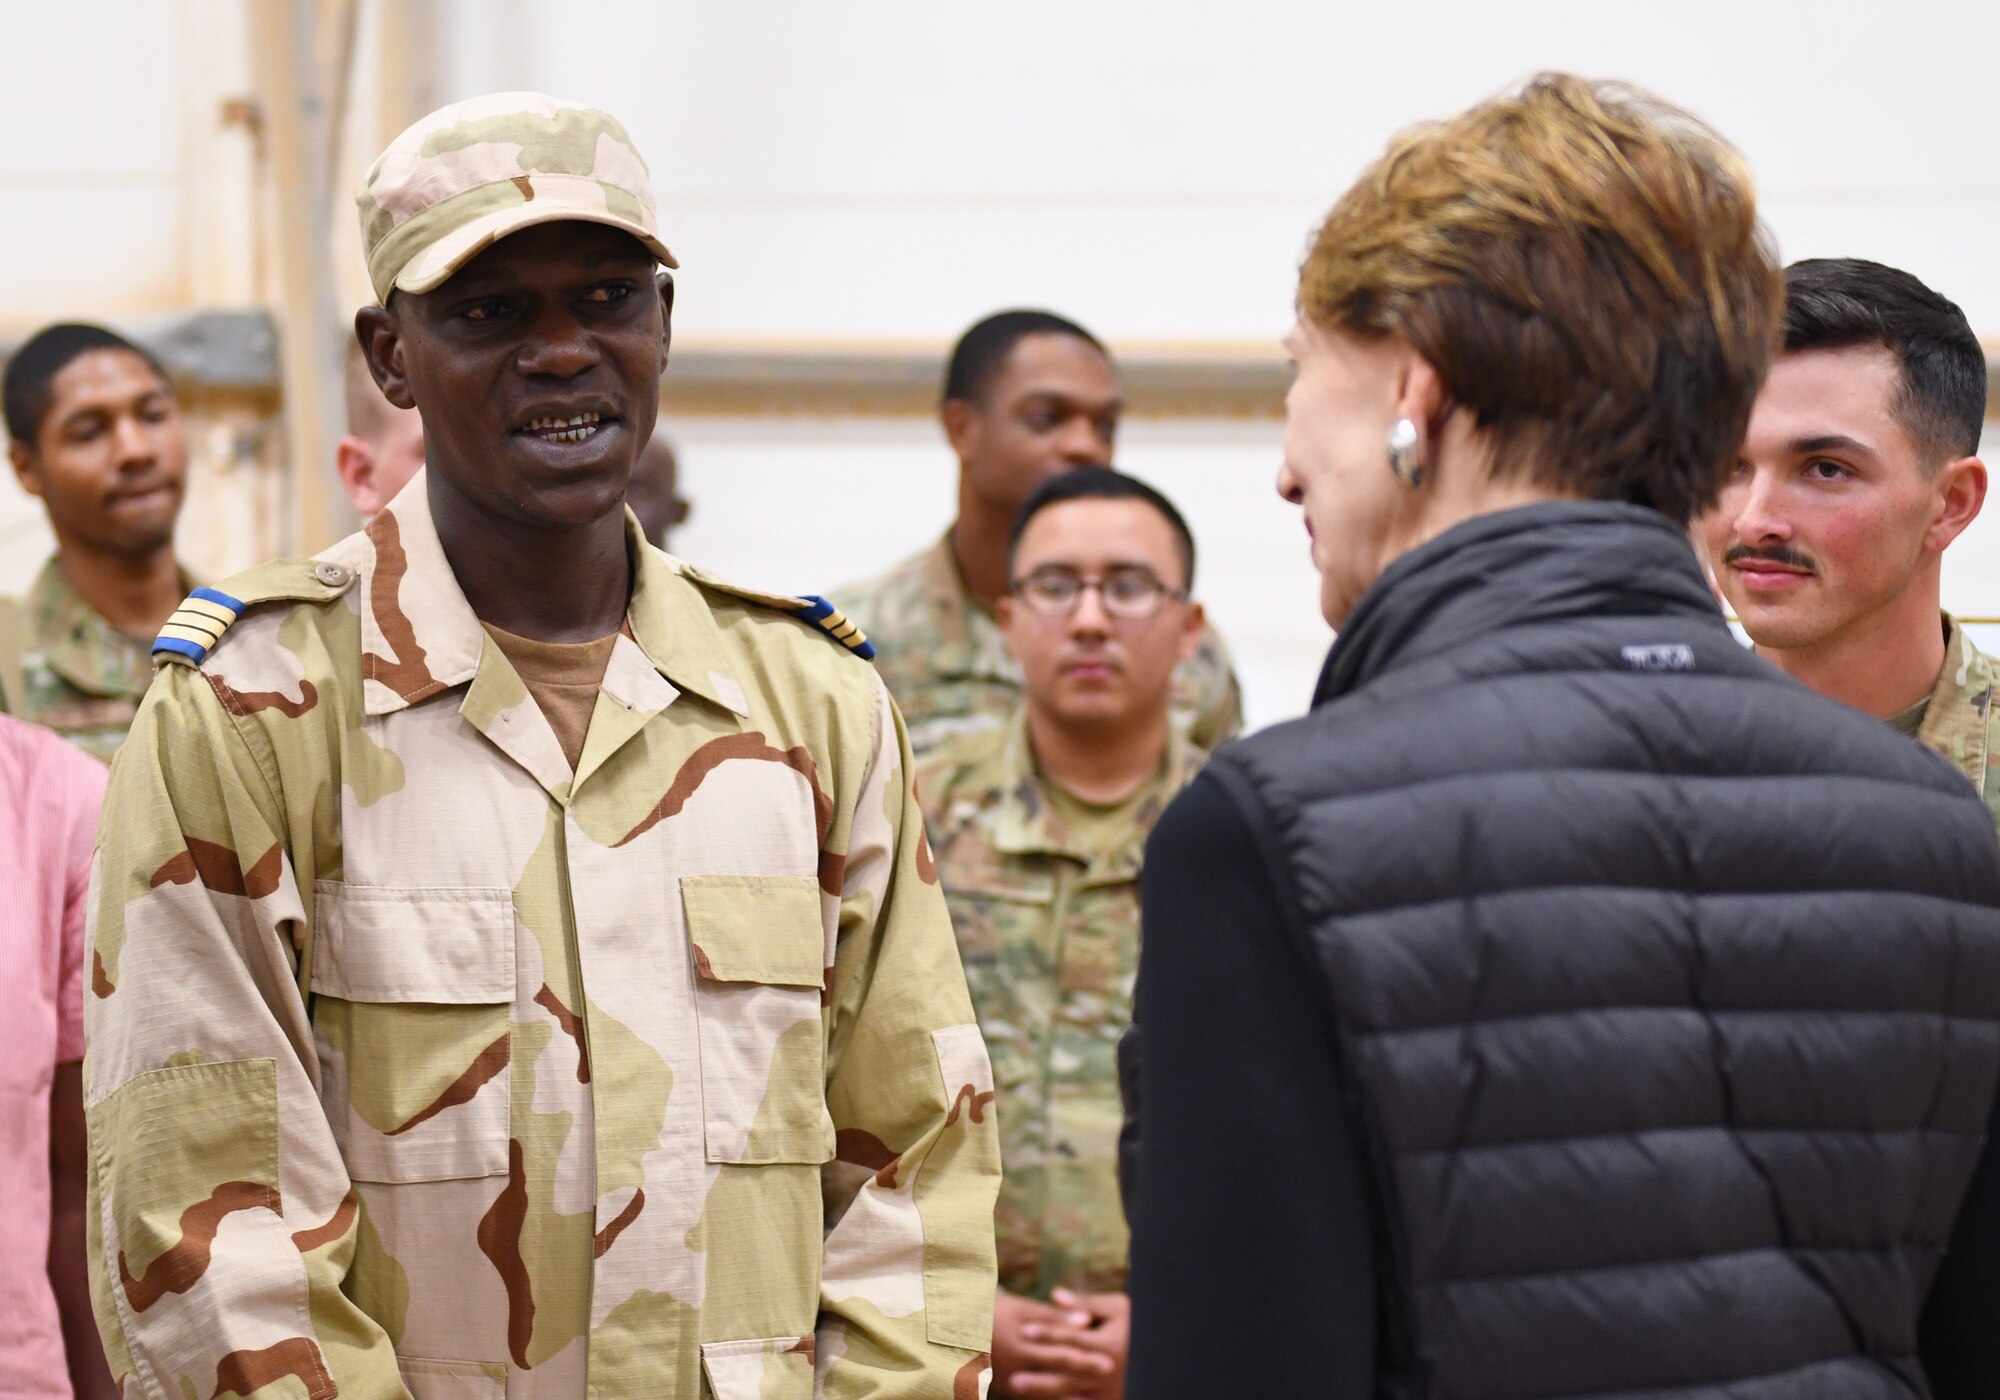 A member of the Forces Armées Nigeriennes (Nigerien Armed Forces) talks with Secretary of the Air Force Barbara M. Barrett during her visit to Nigerien Air Base 201, Niger, Dec. 21, 2019. Members of the 409th Expeditionary Security Forces Squadron and FAN work together through their cooperative partnership to vigilantly secure and defend the base. (U.S. Air Force photo by Staff Sgt. Alex Fox Echols III)